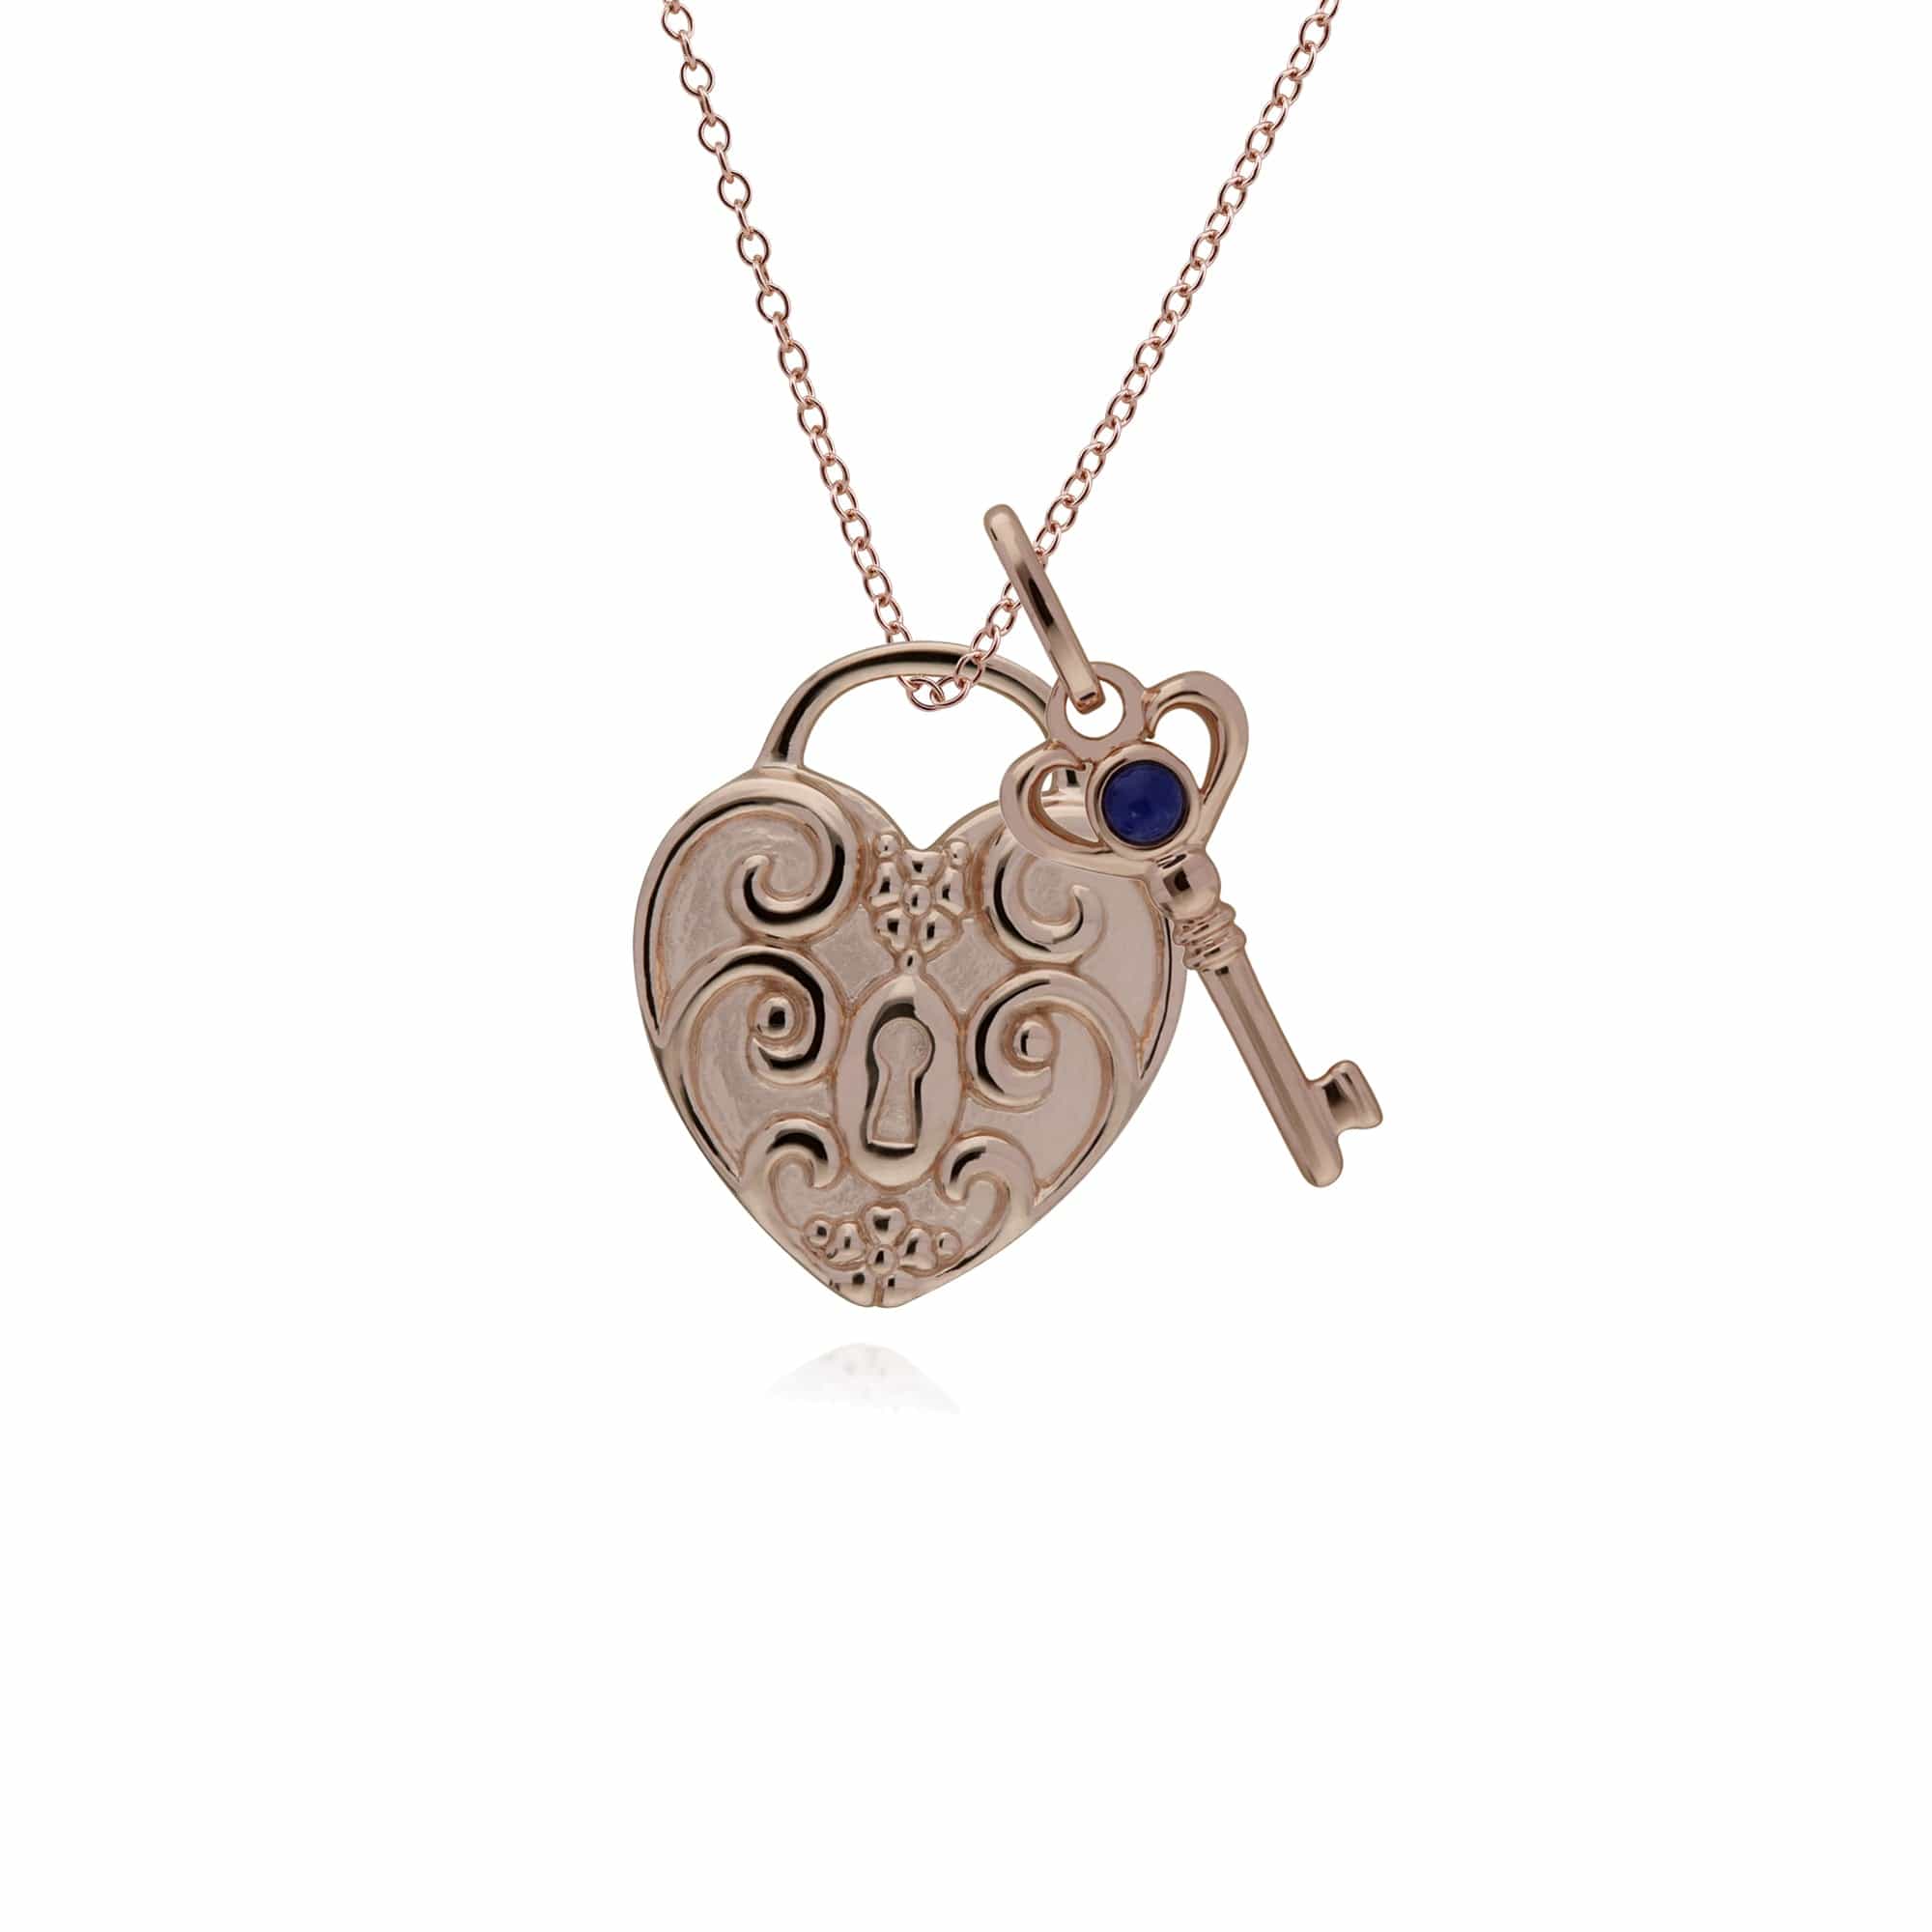 270P027401925-270P026501925 Classic Swirl Heart Lock Pendant & Lapis Lazuli Key Charm in Rose Gold Plated 925 Sterling Silver 1